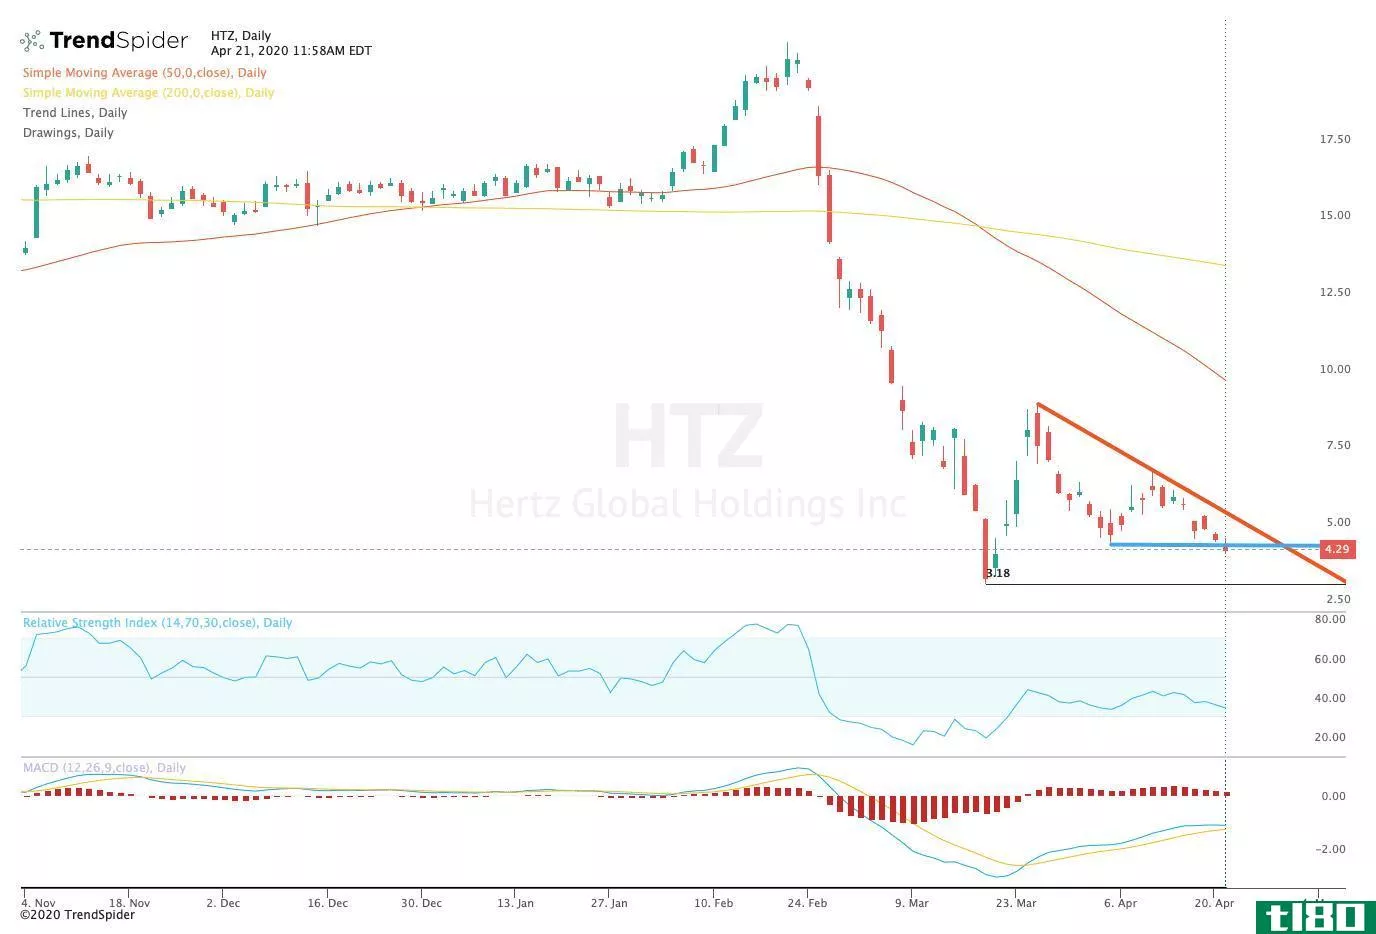 Chart showing the share price performance of Hertz Global Holdings, Inc. (HTZ)